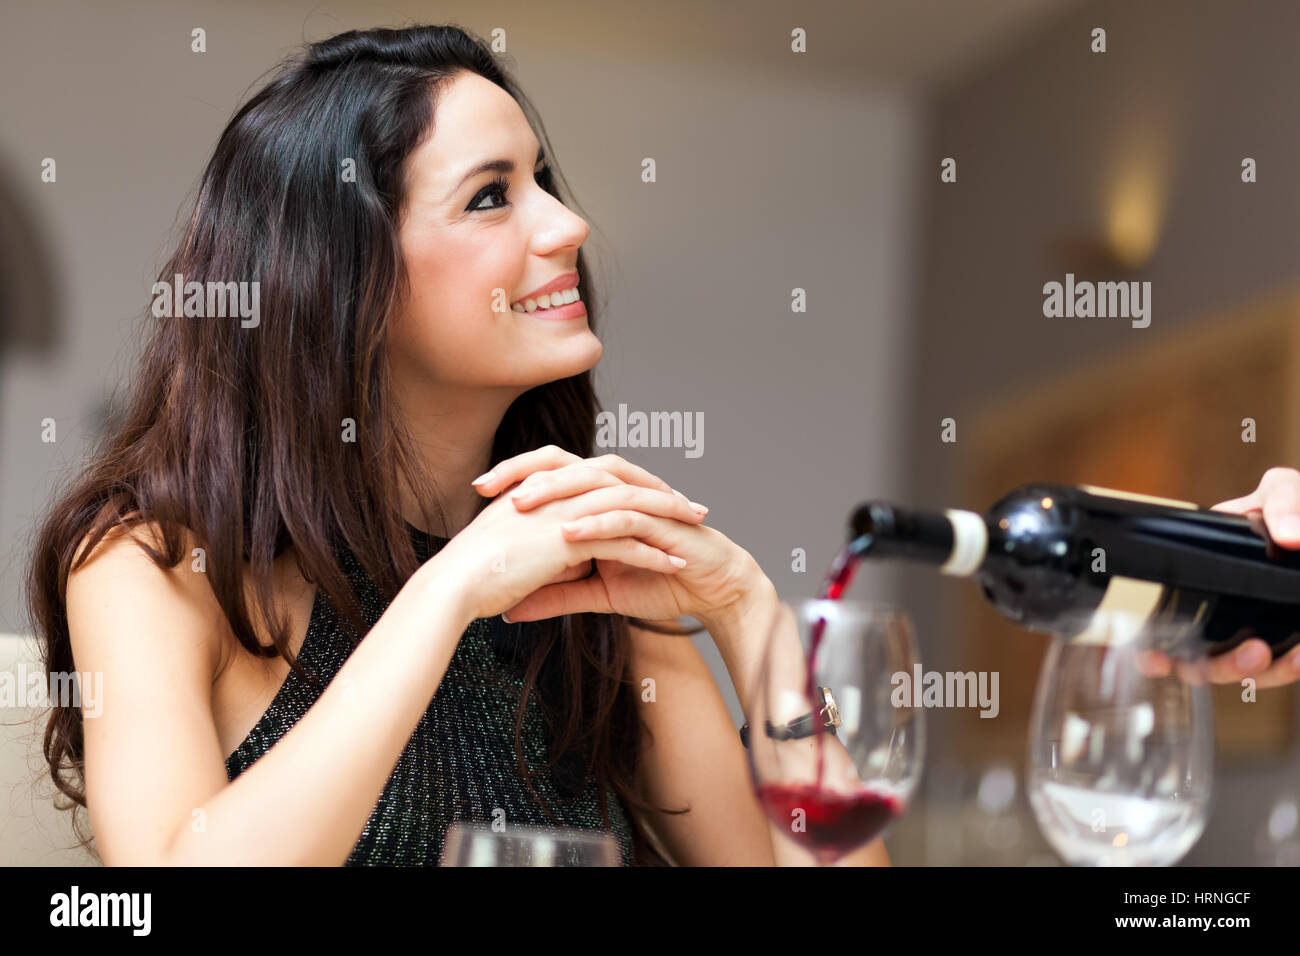 Waiter Pouring Wine Stock Photos & Waiter Pouring Wine Stock Images - Alamy